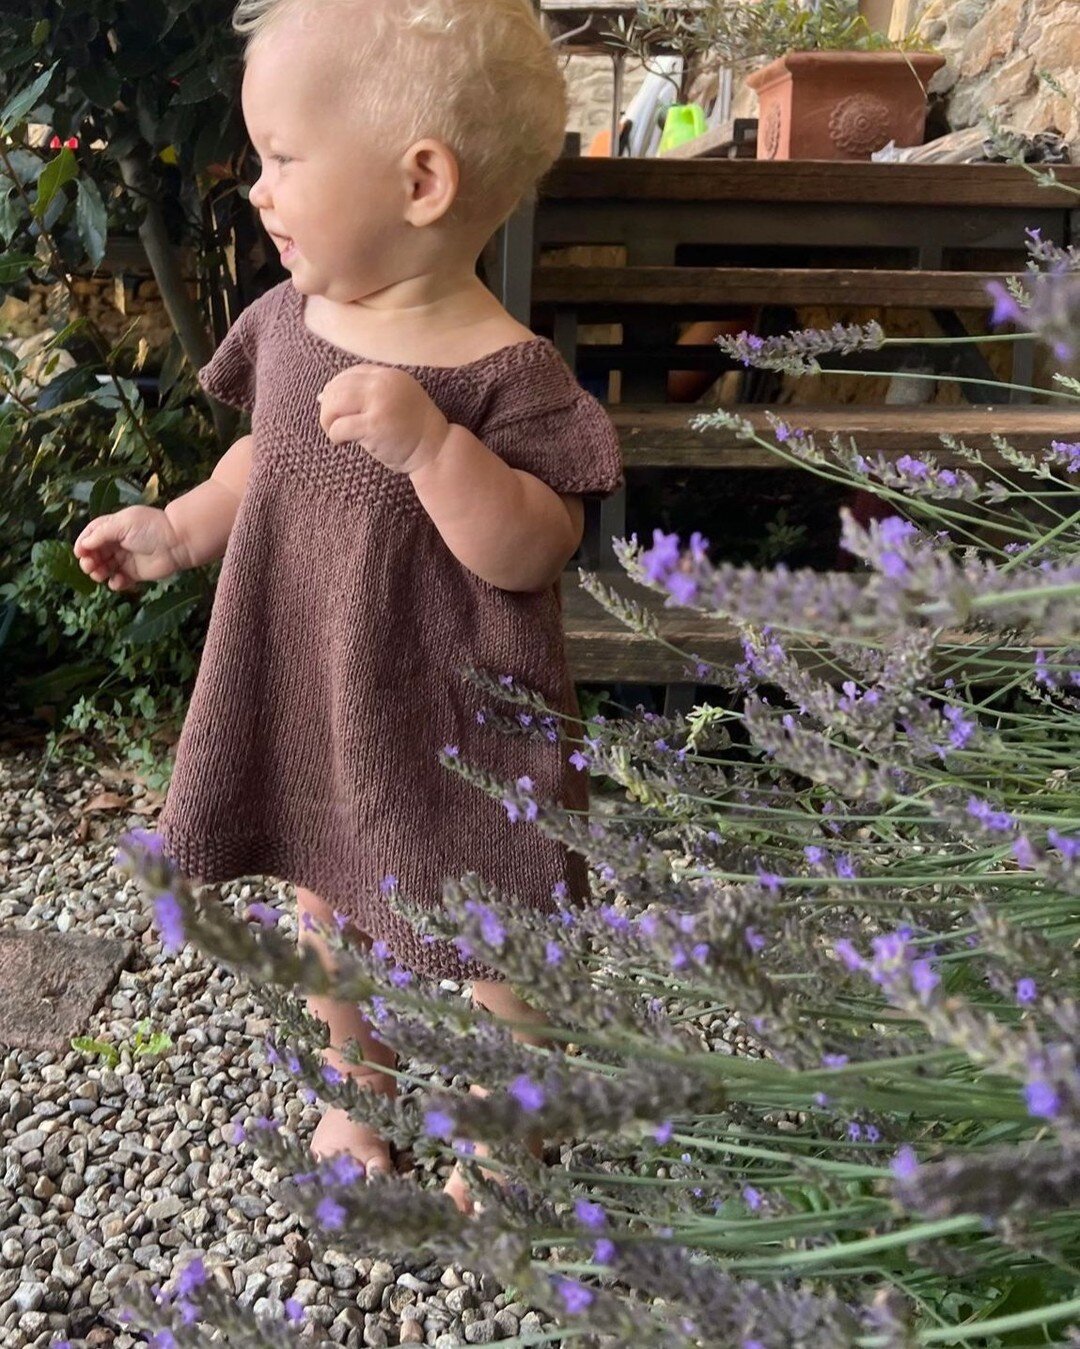 Beautiful memories of the summer ❤️
Pattern: Fable Dress
Available in my Etsy and Ravelry stores (follow link in my bio)
.
.
#frogginette #frogginetteknittingpatterns #fabledress #babyknitdress #knitforyourkid #knitforkids #knitforbaby #babyknitting 